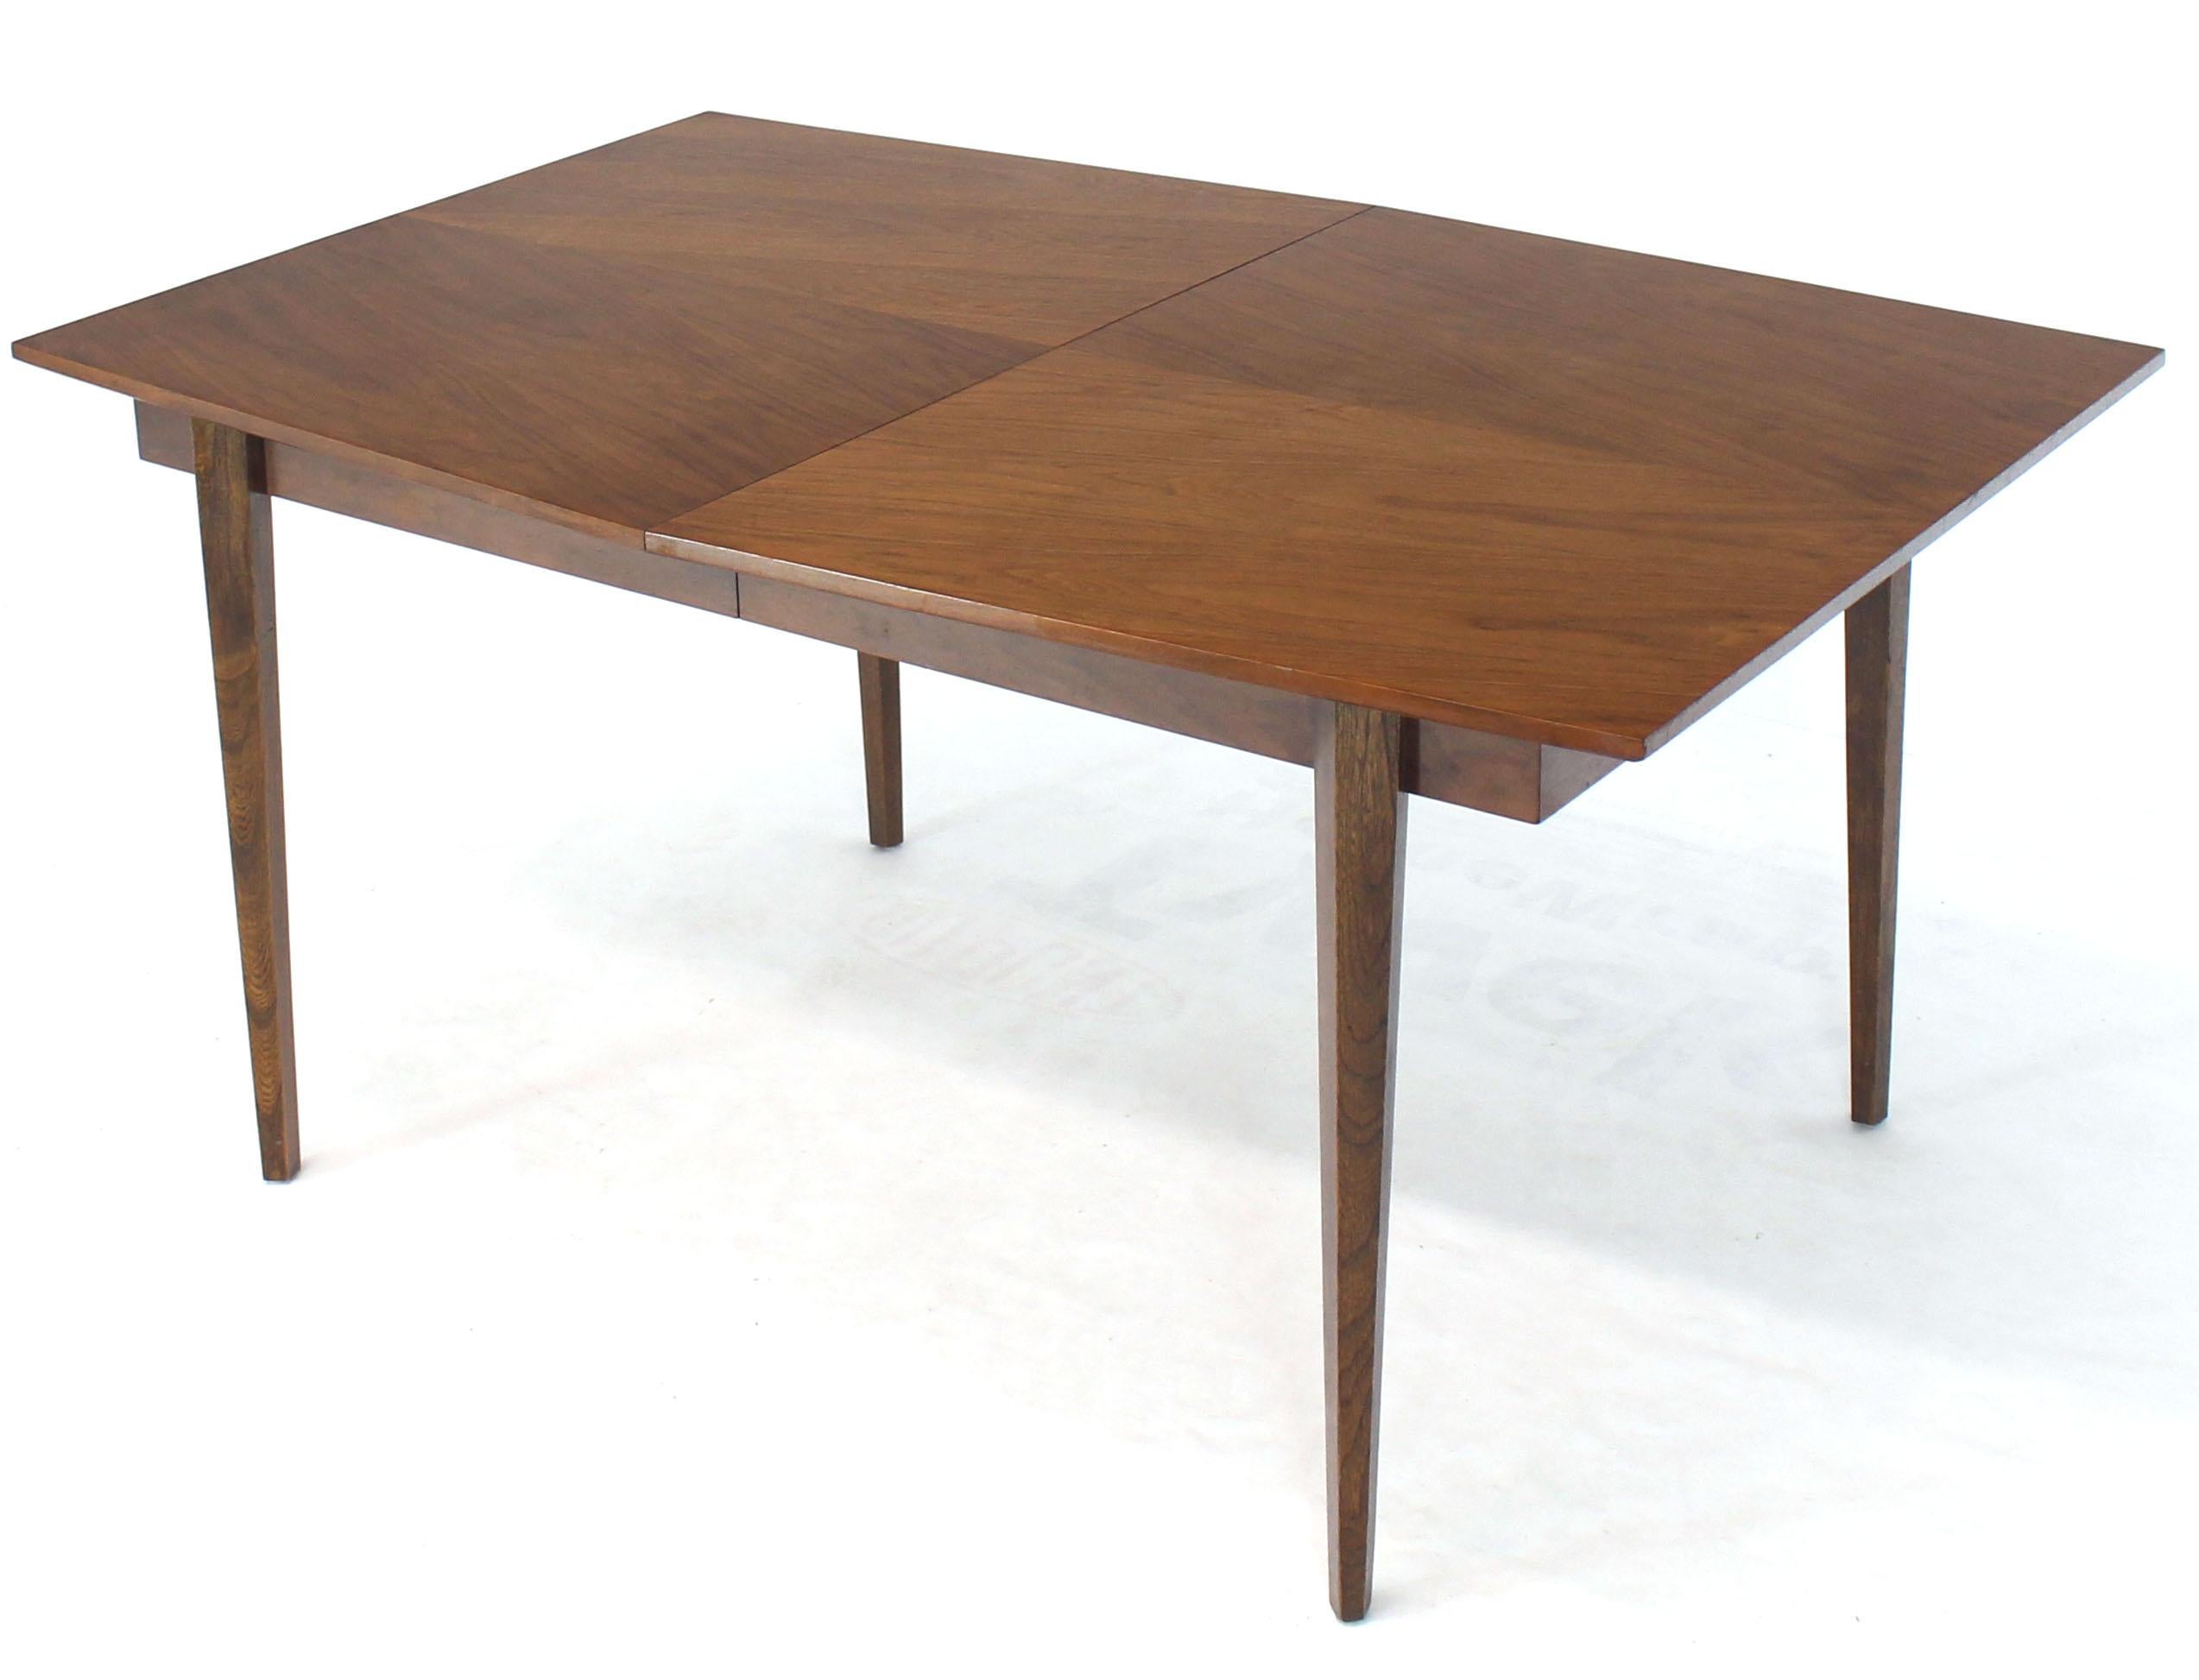 Mid-Century Modern oiled walnut finish wide angle dining table with two 18